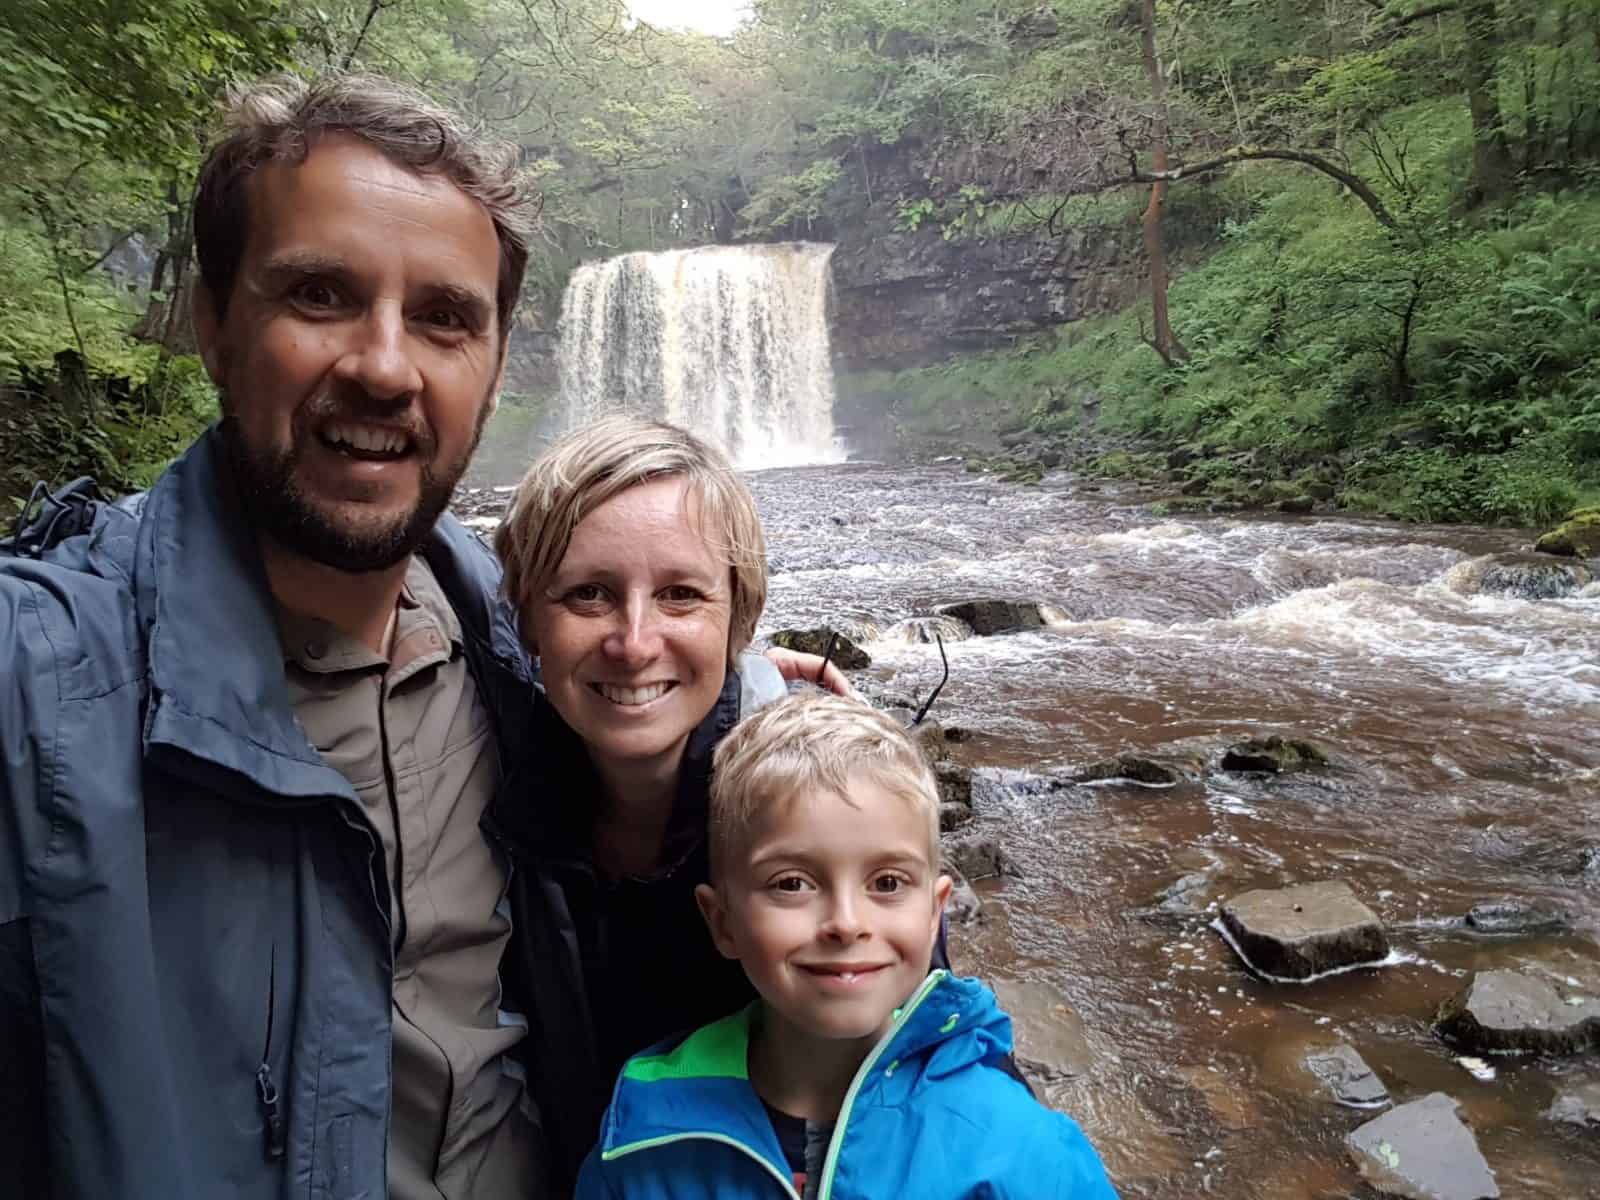 Family selfie in front of a waterfall